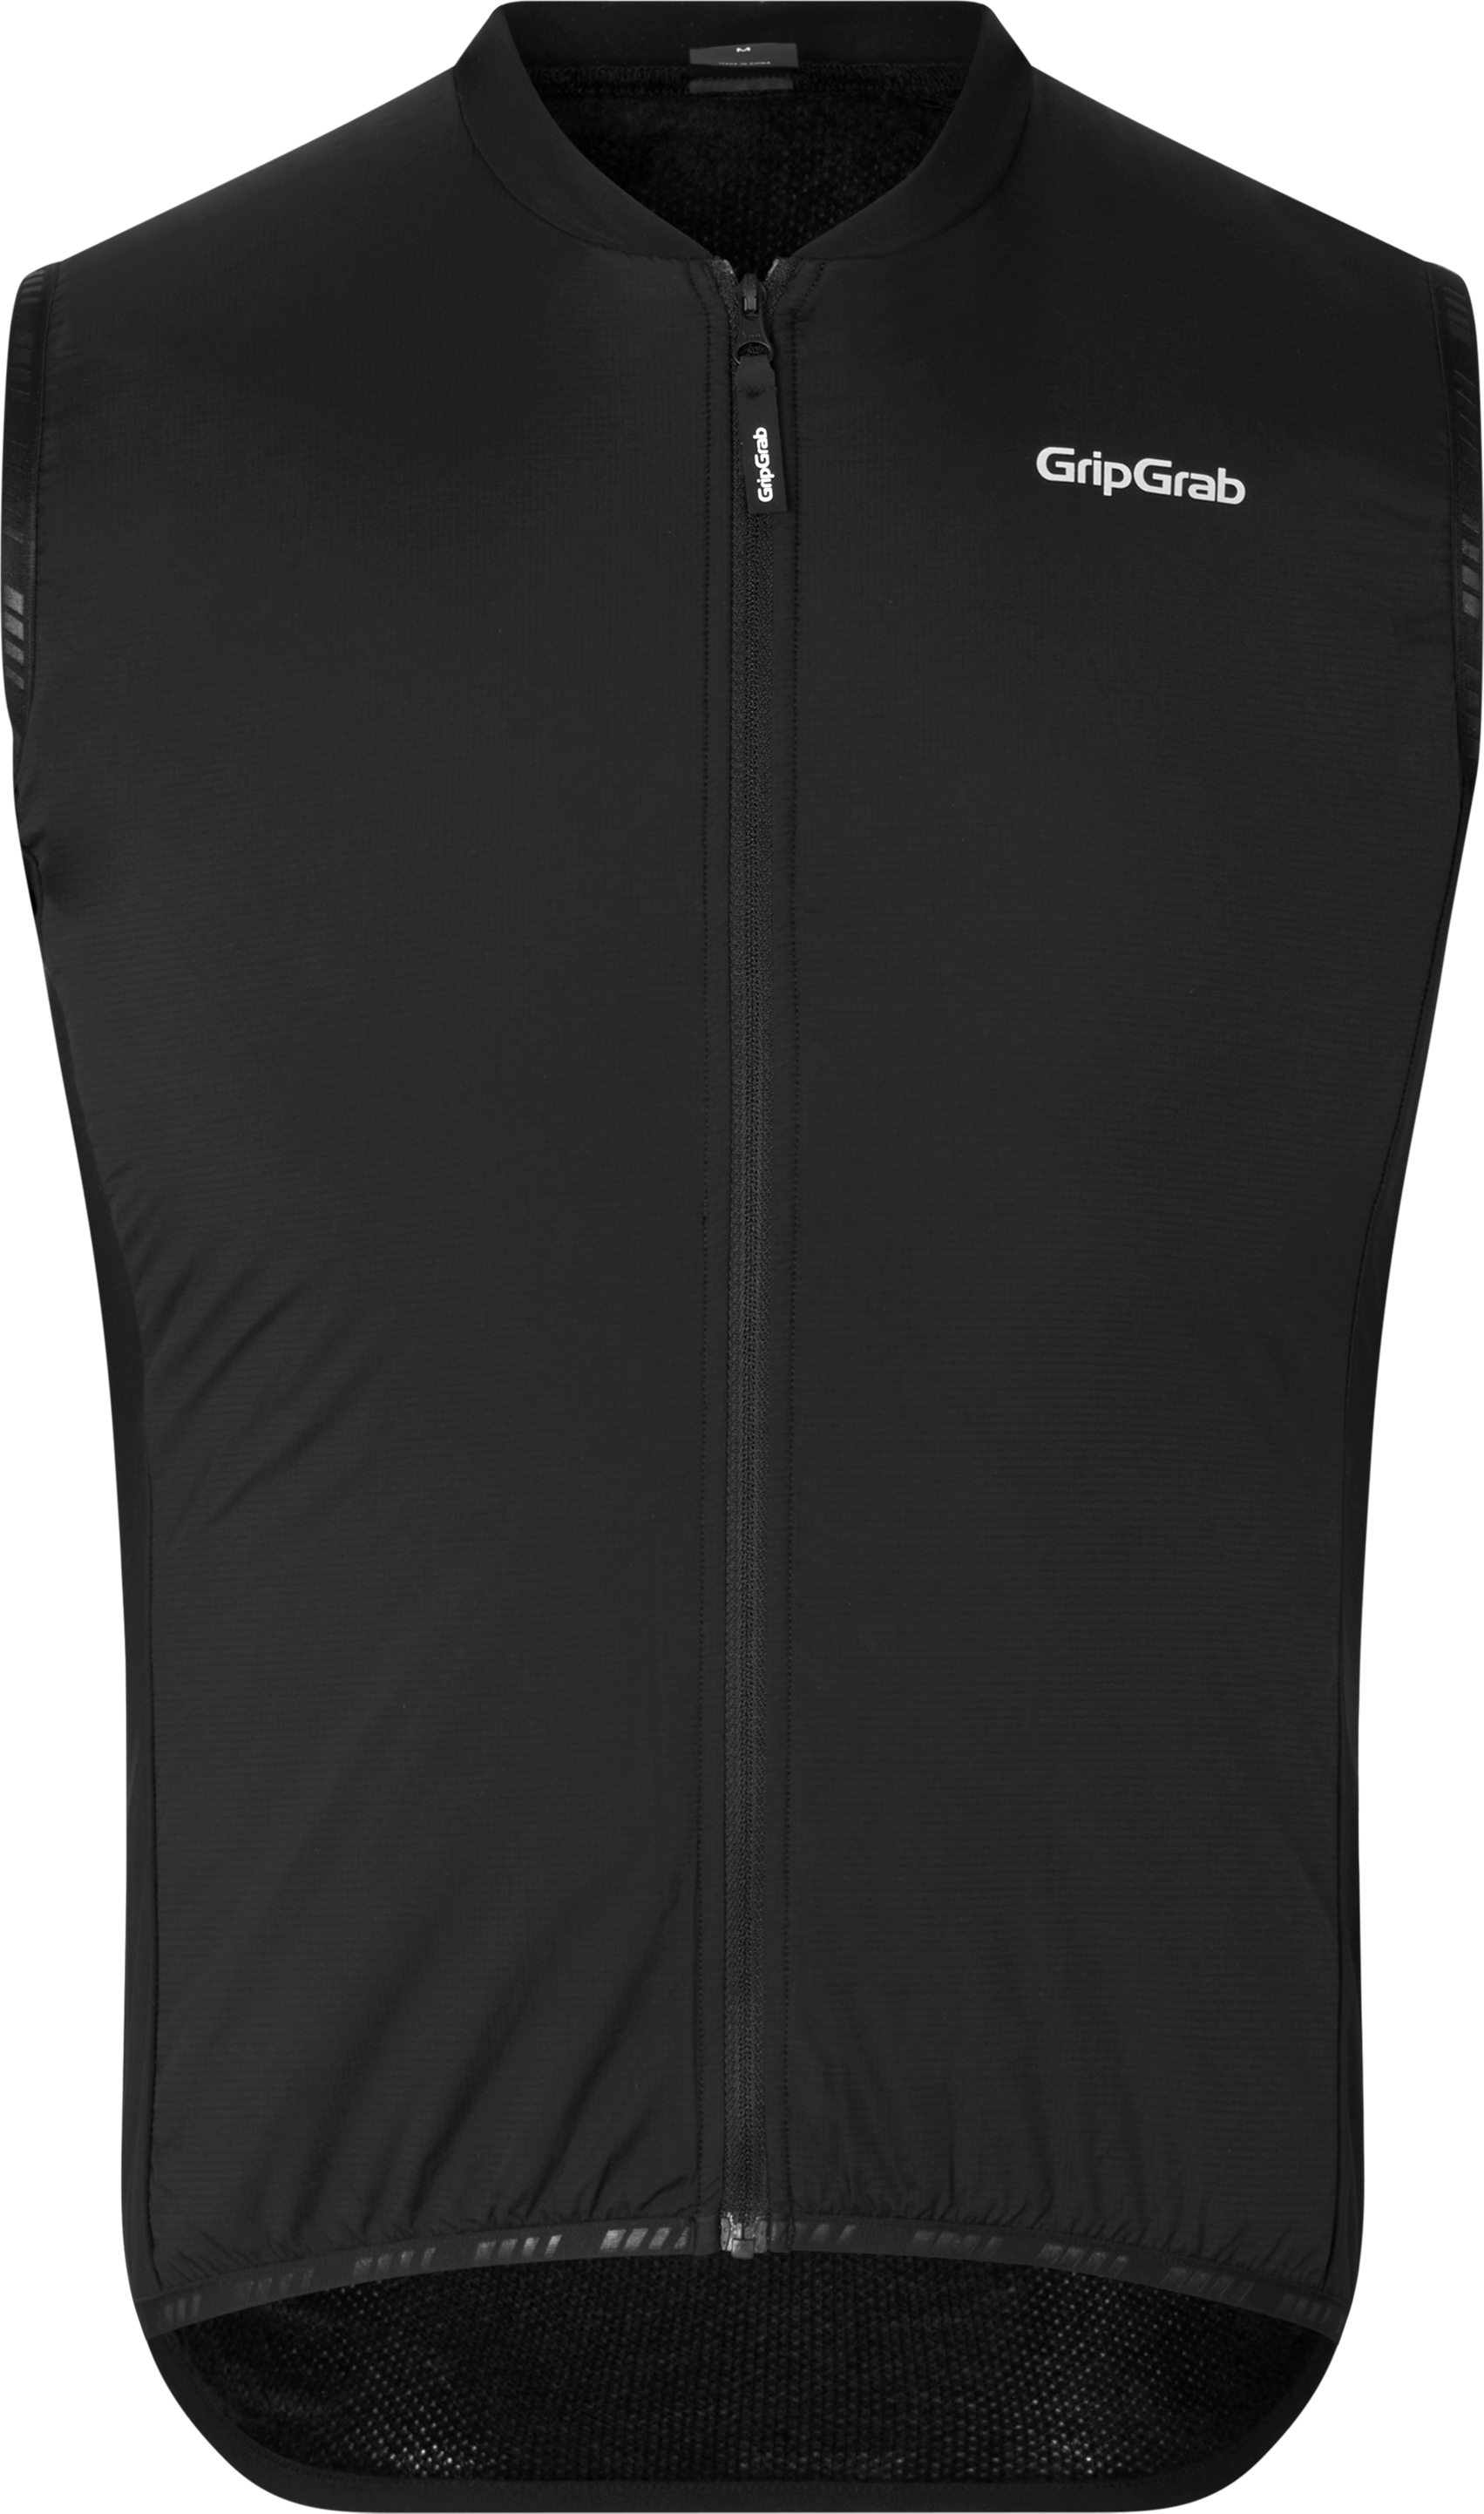 Gripgrab Men’s ThermaCore Bodywarmer Mid-Layer Vest Black